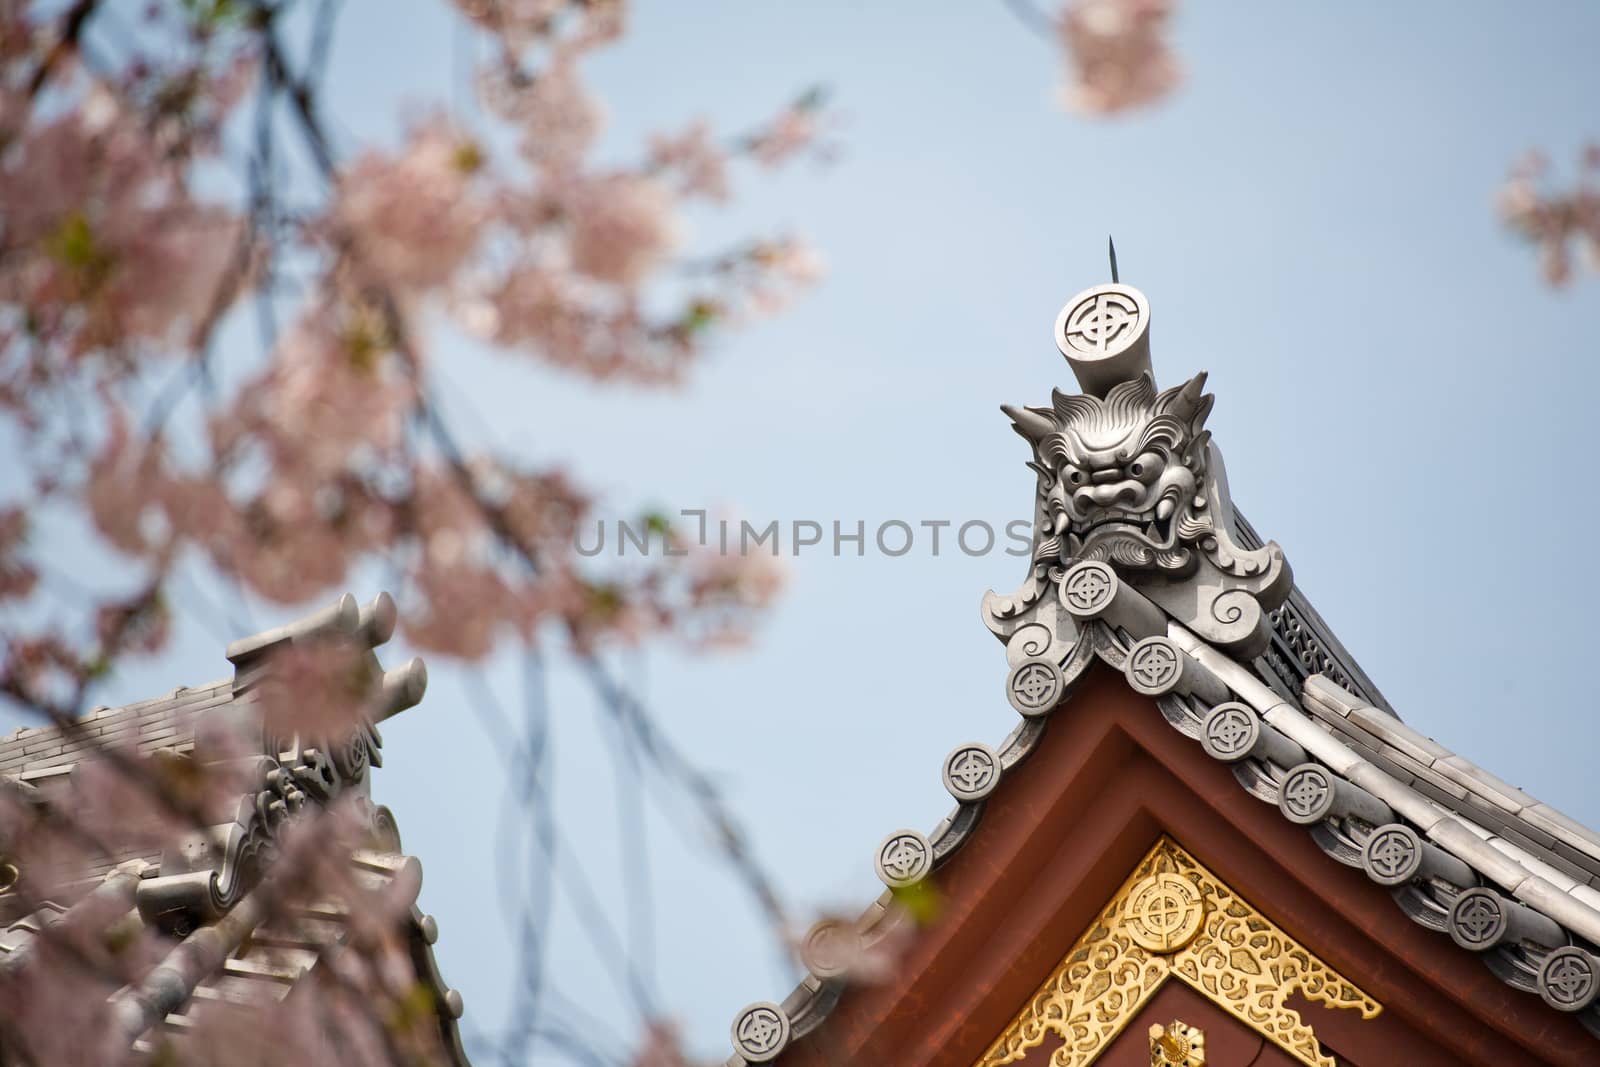 Detail on japanese temple roof against blue sky.